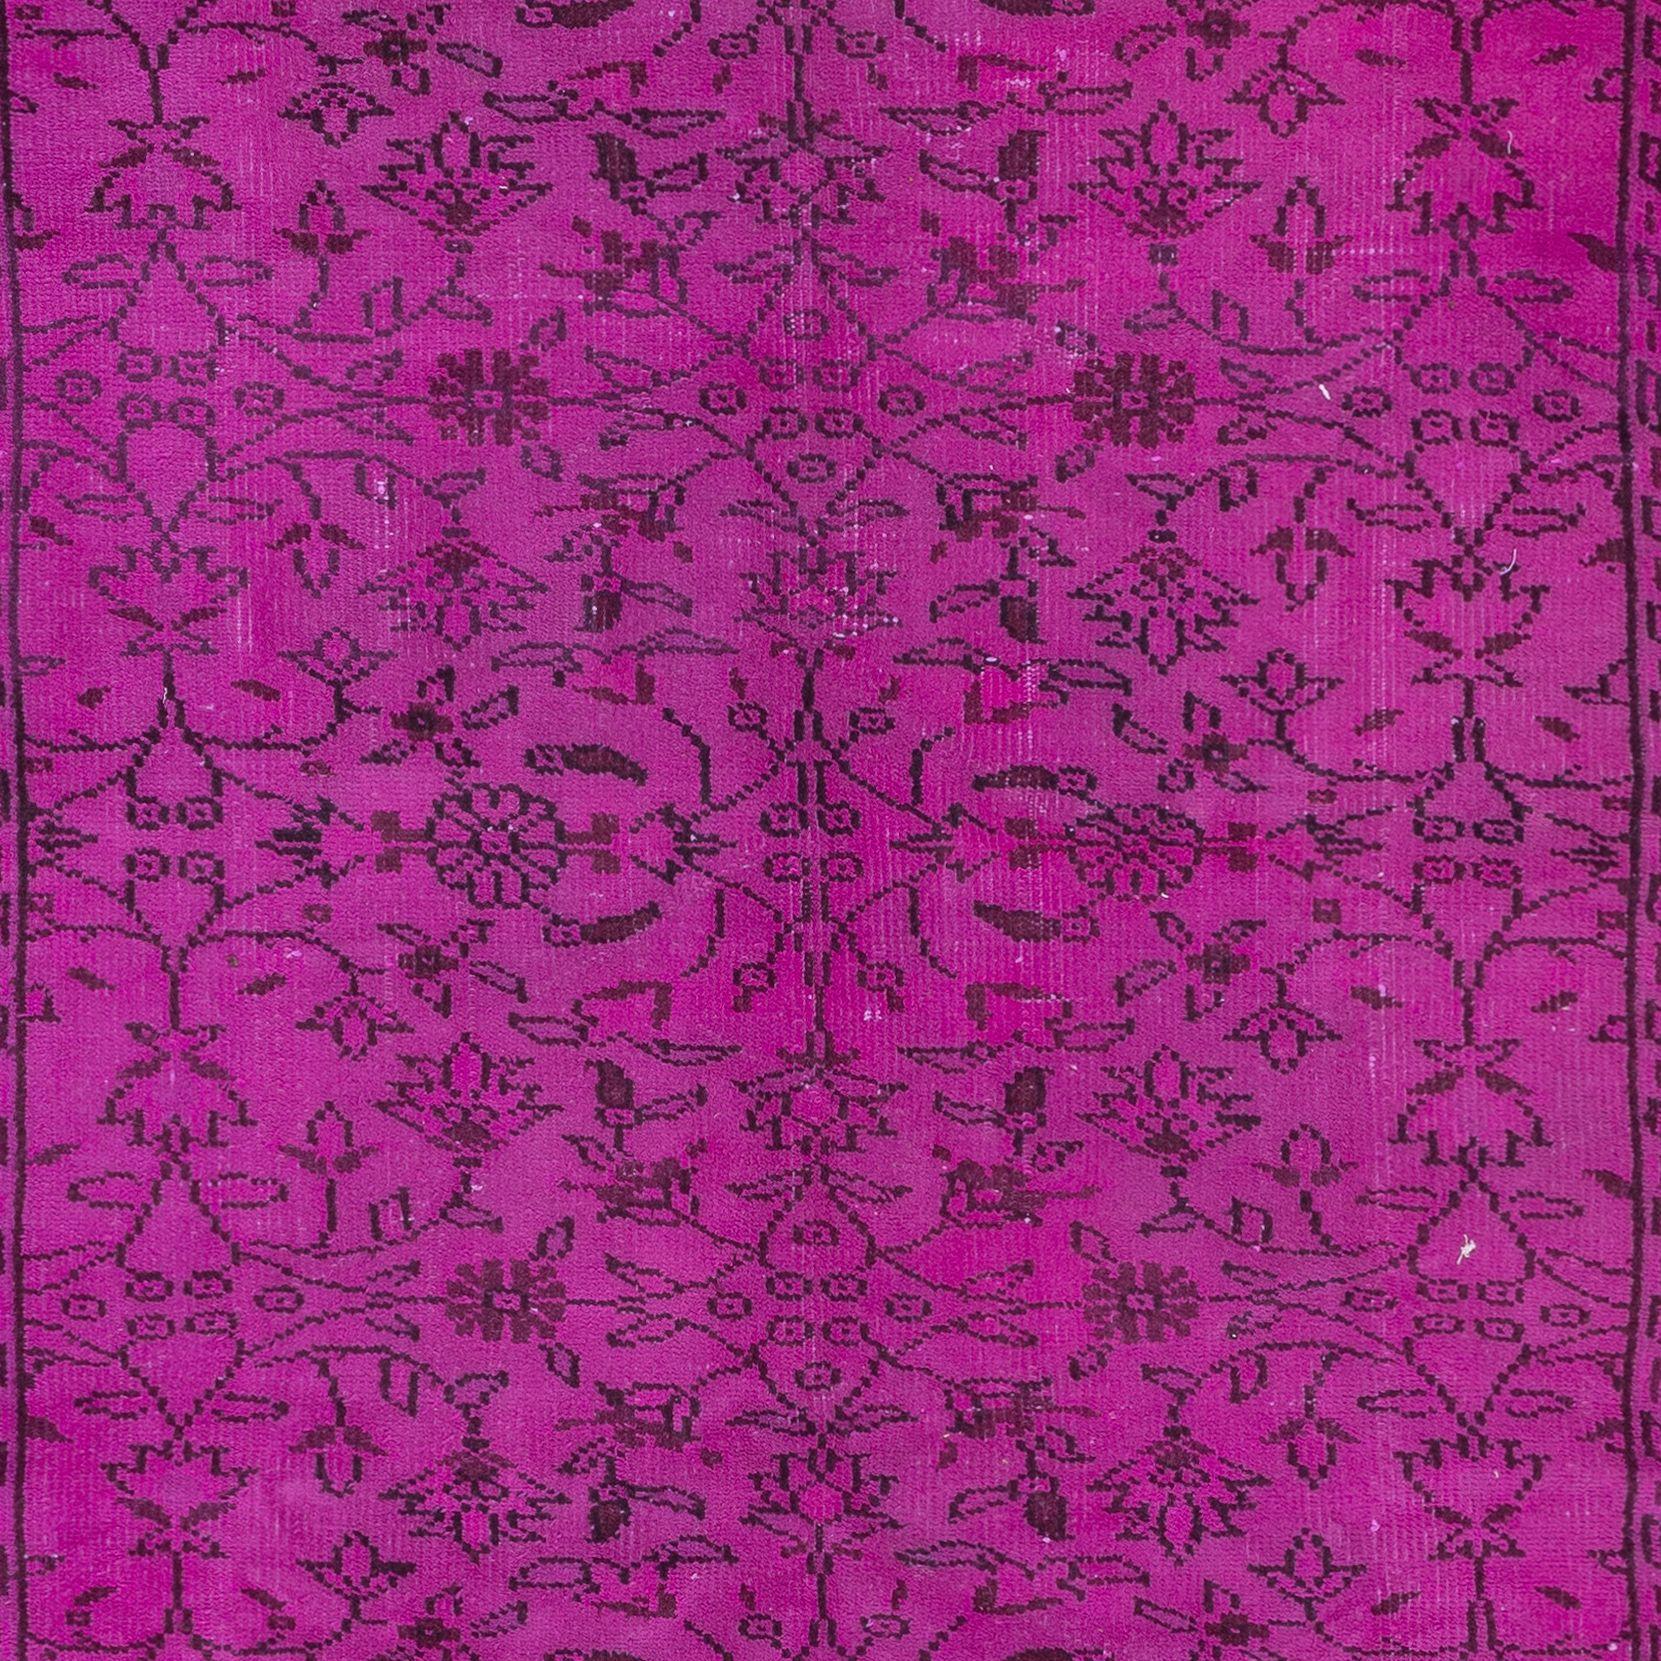 Turkish 5.5x8.7 Ft Modern Floral Pattern Rug in Pink, Handwoven & Handknotted in Turkey For Sale